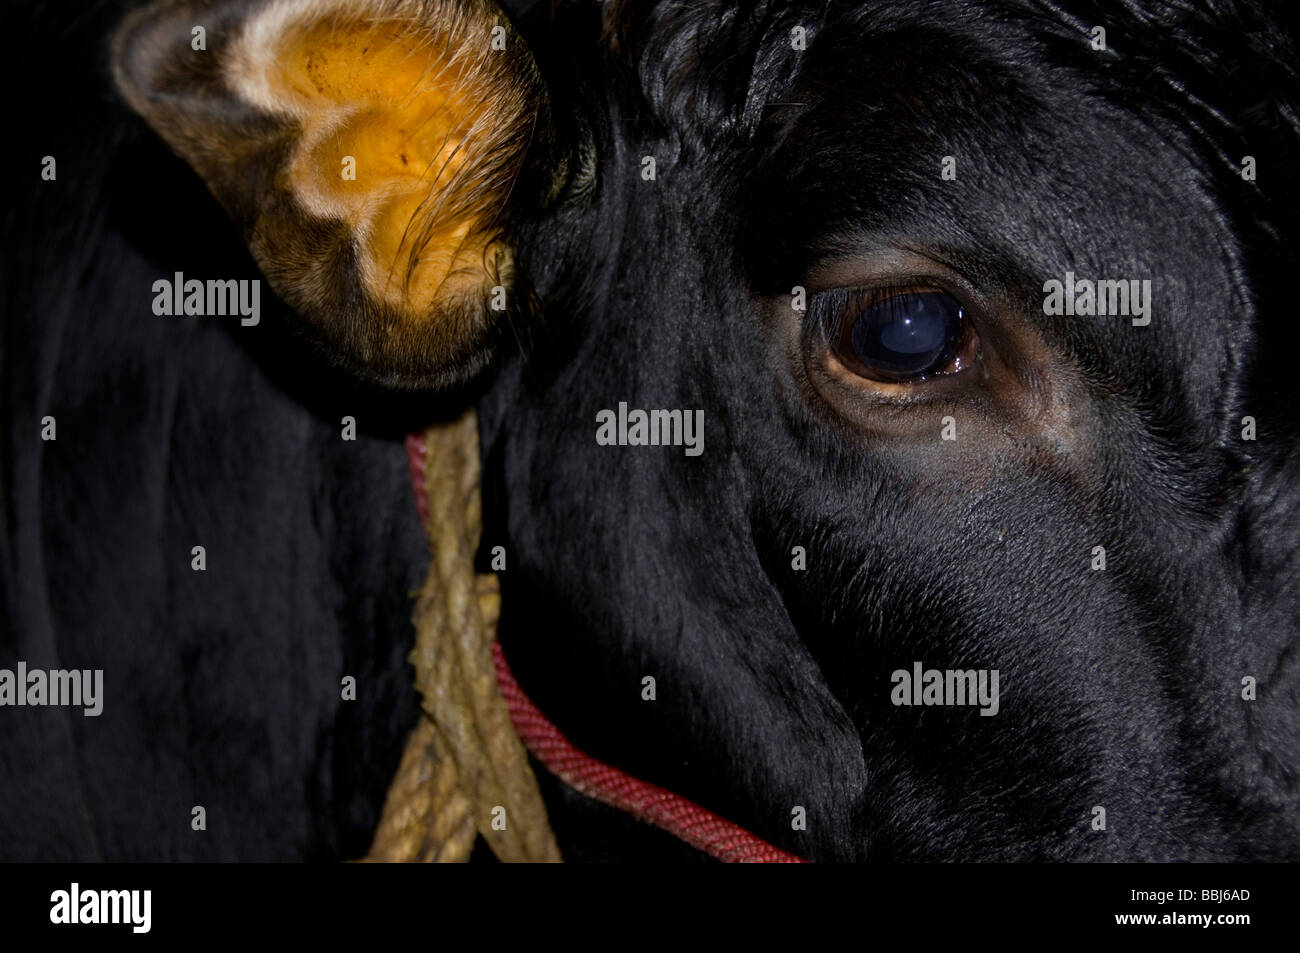 Cow Shed India High Resolution Stock Photography and ...